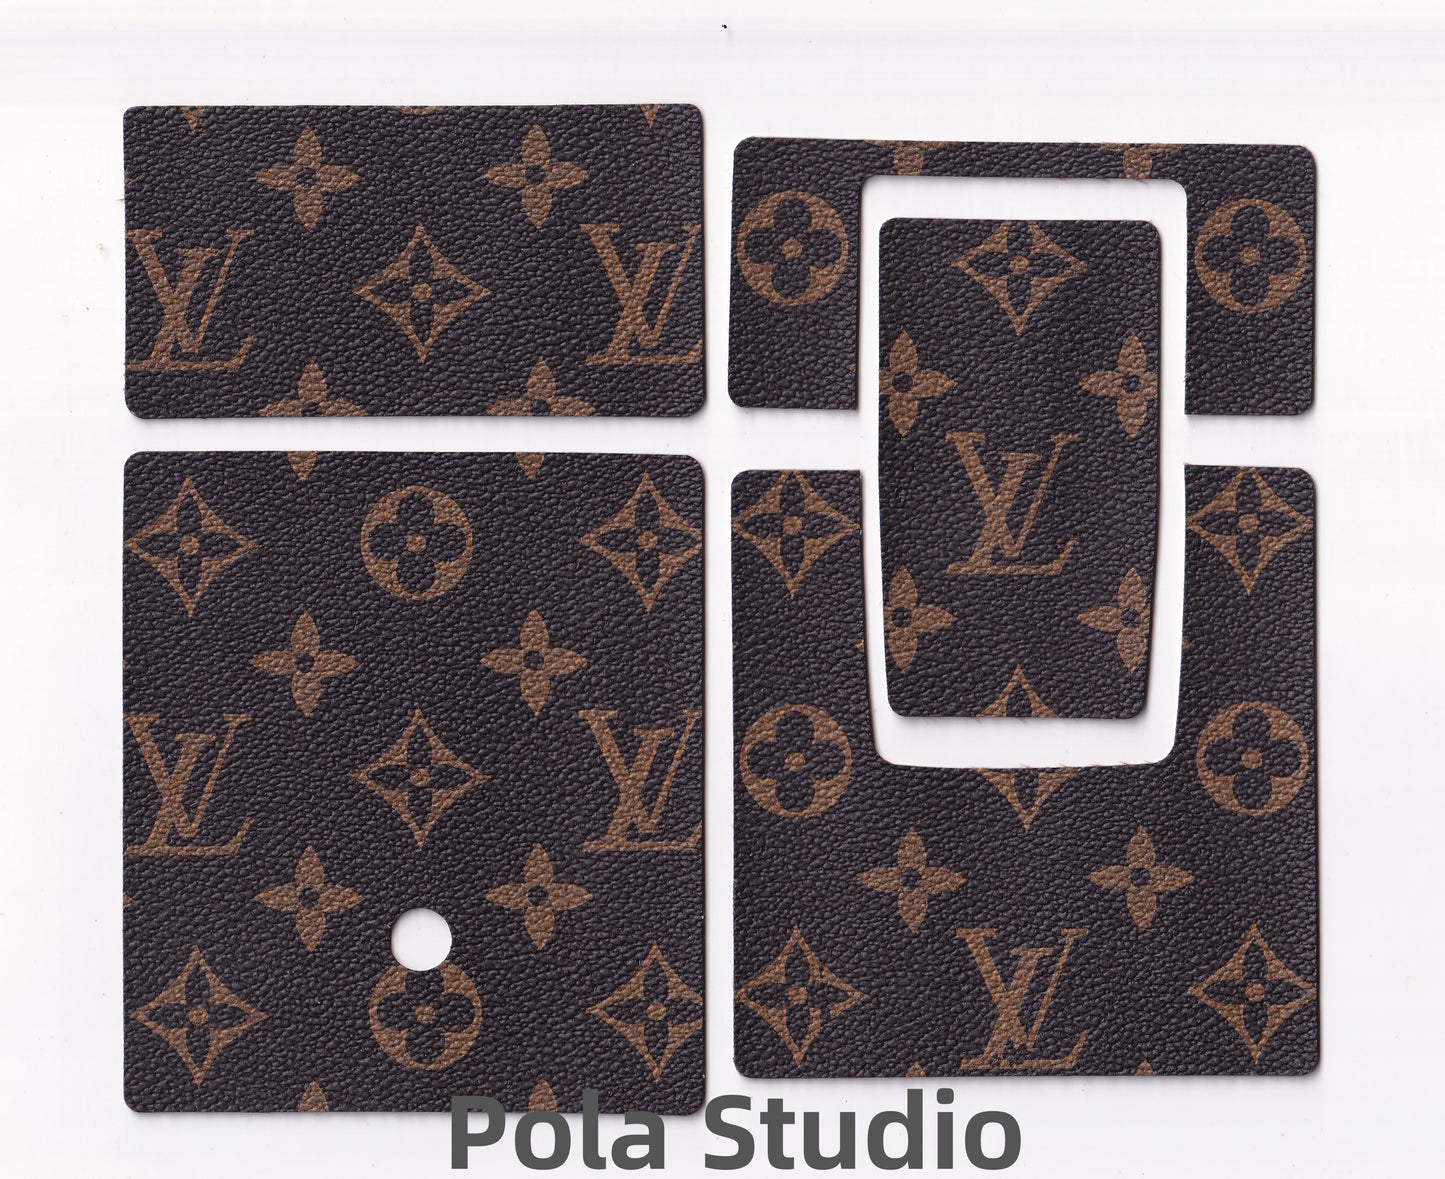 Louis Vuitton Leather Cases, Covers & Skins